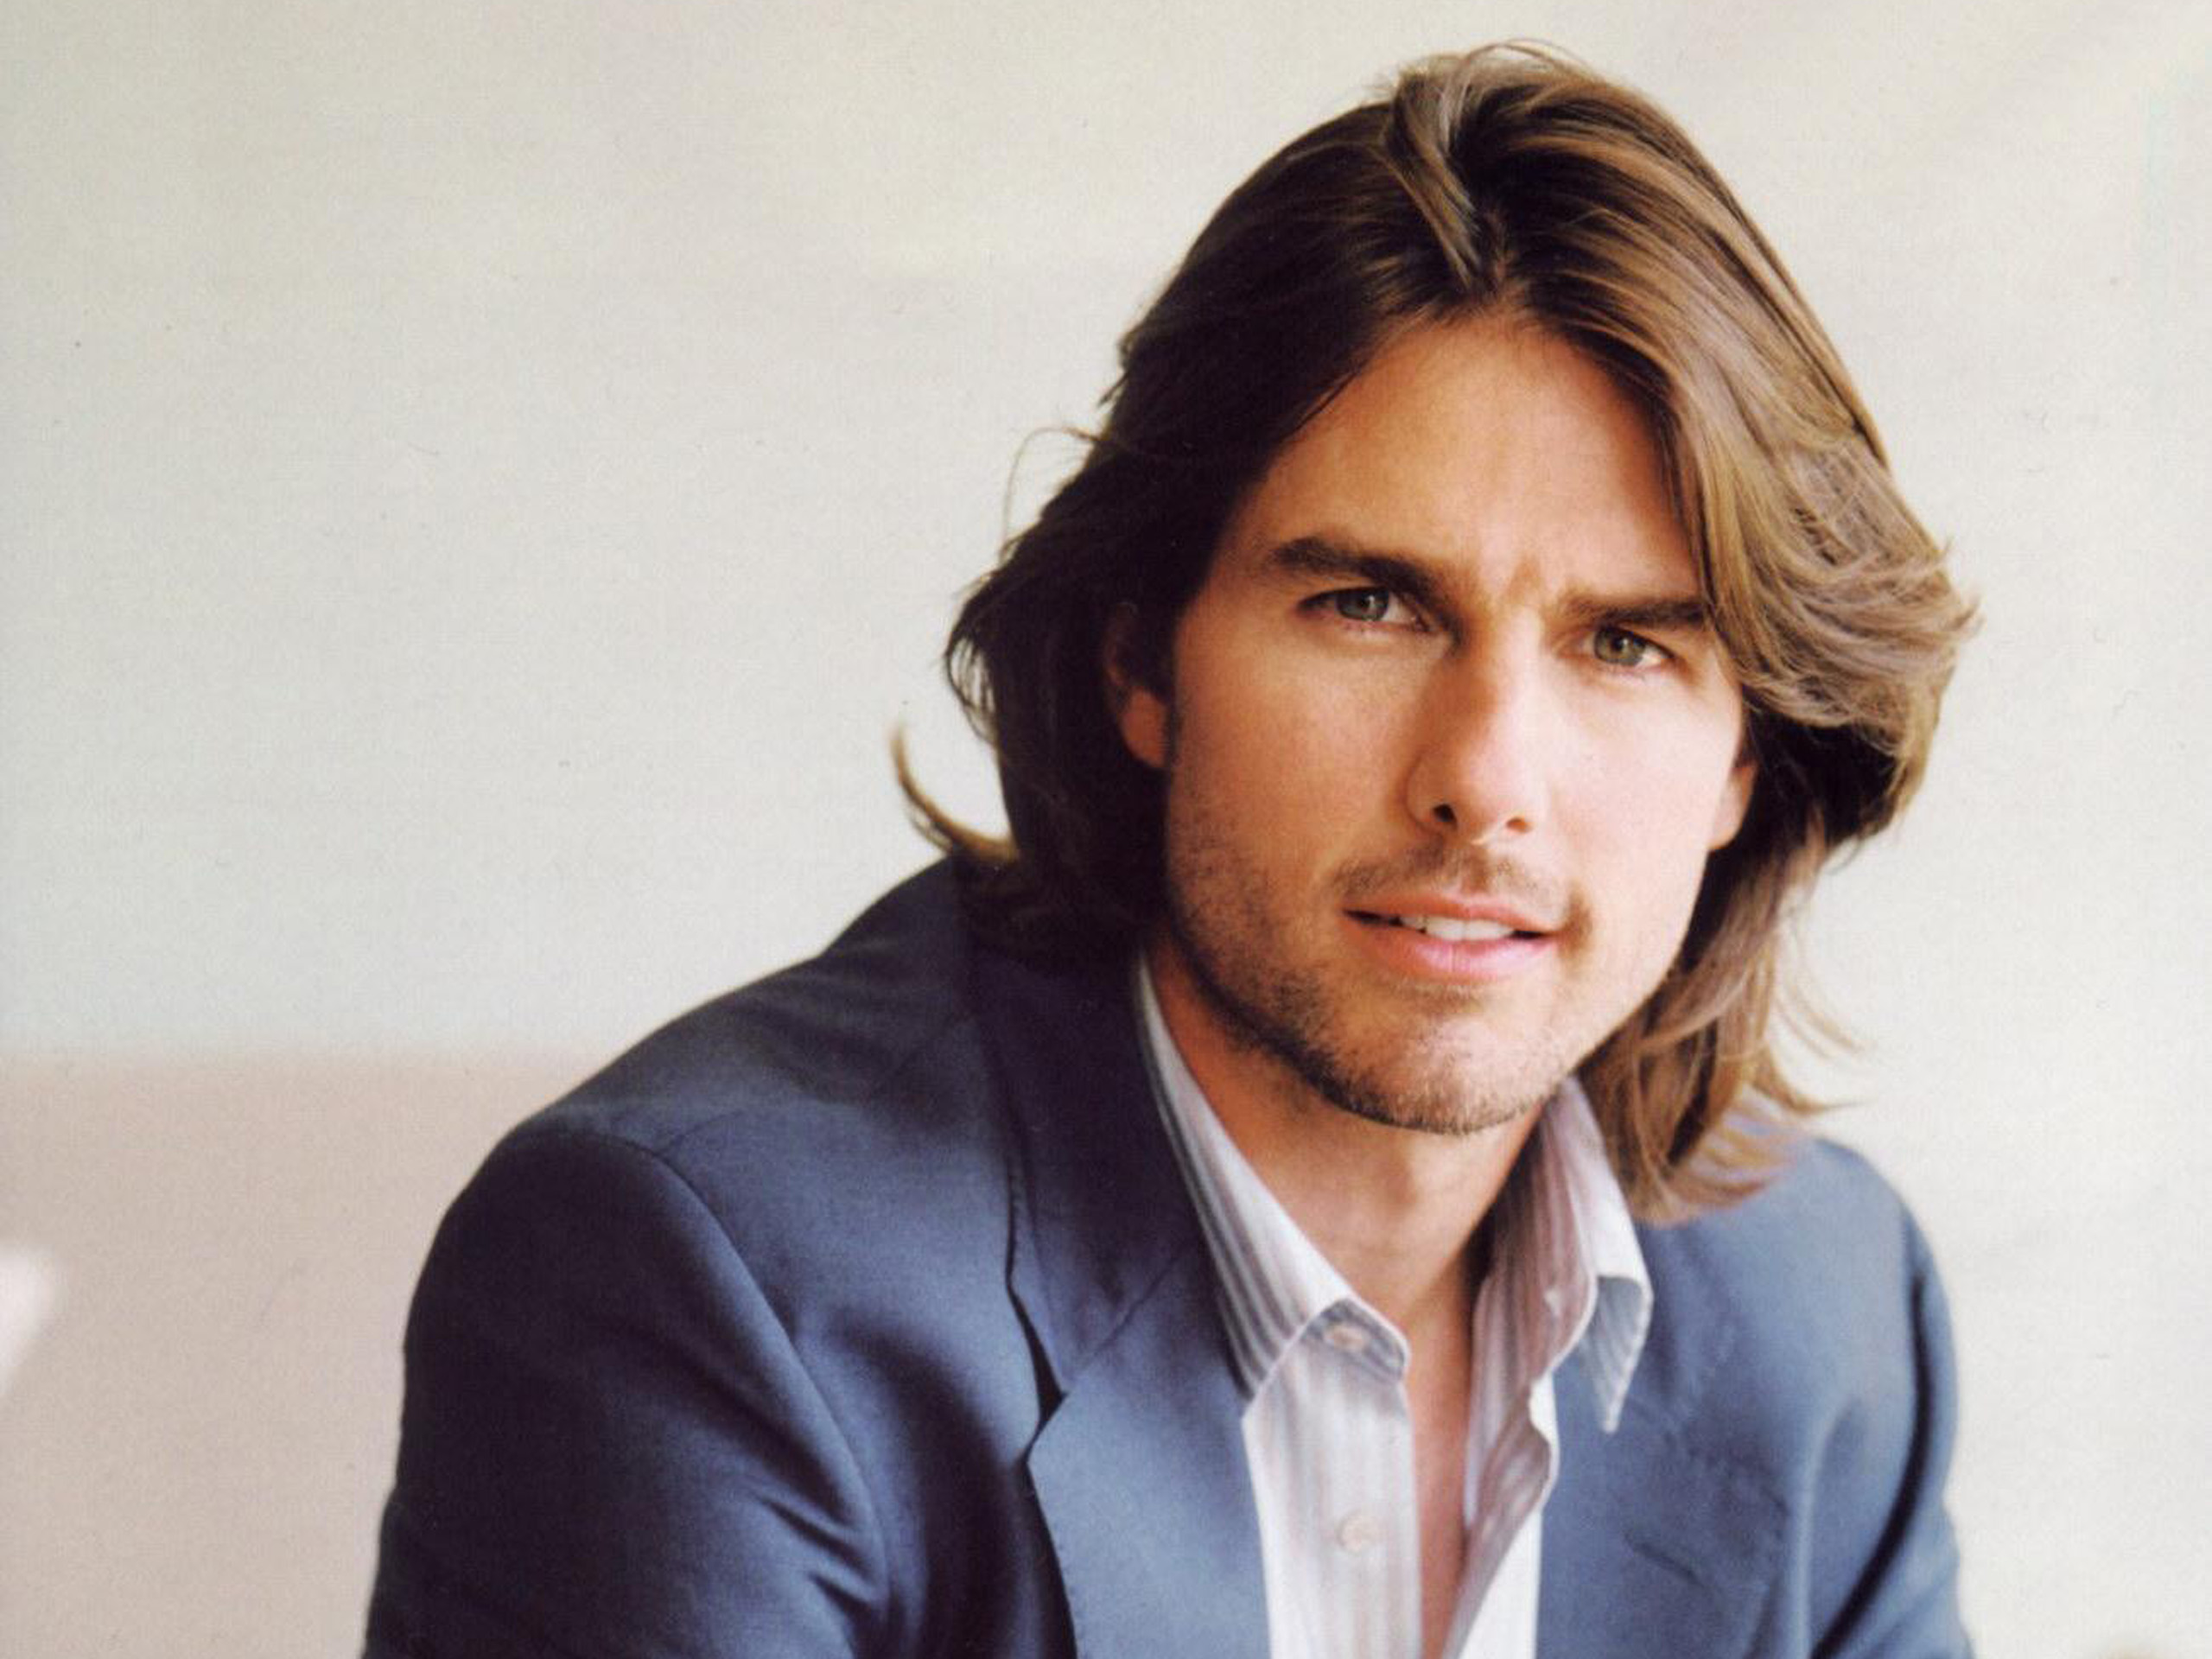 Tom Cruise Image HD Wallpaper And Background Photos